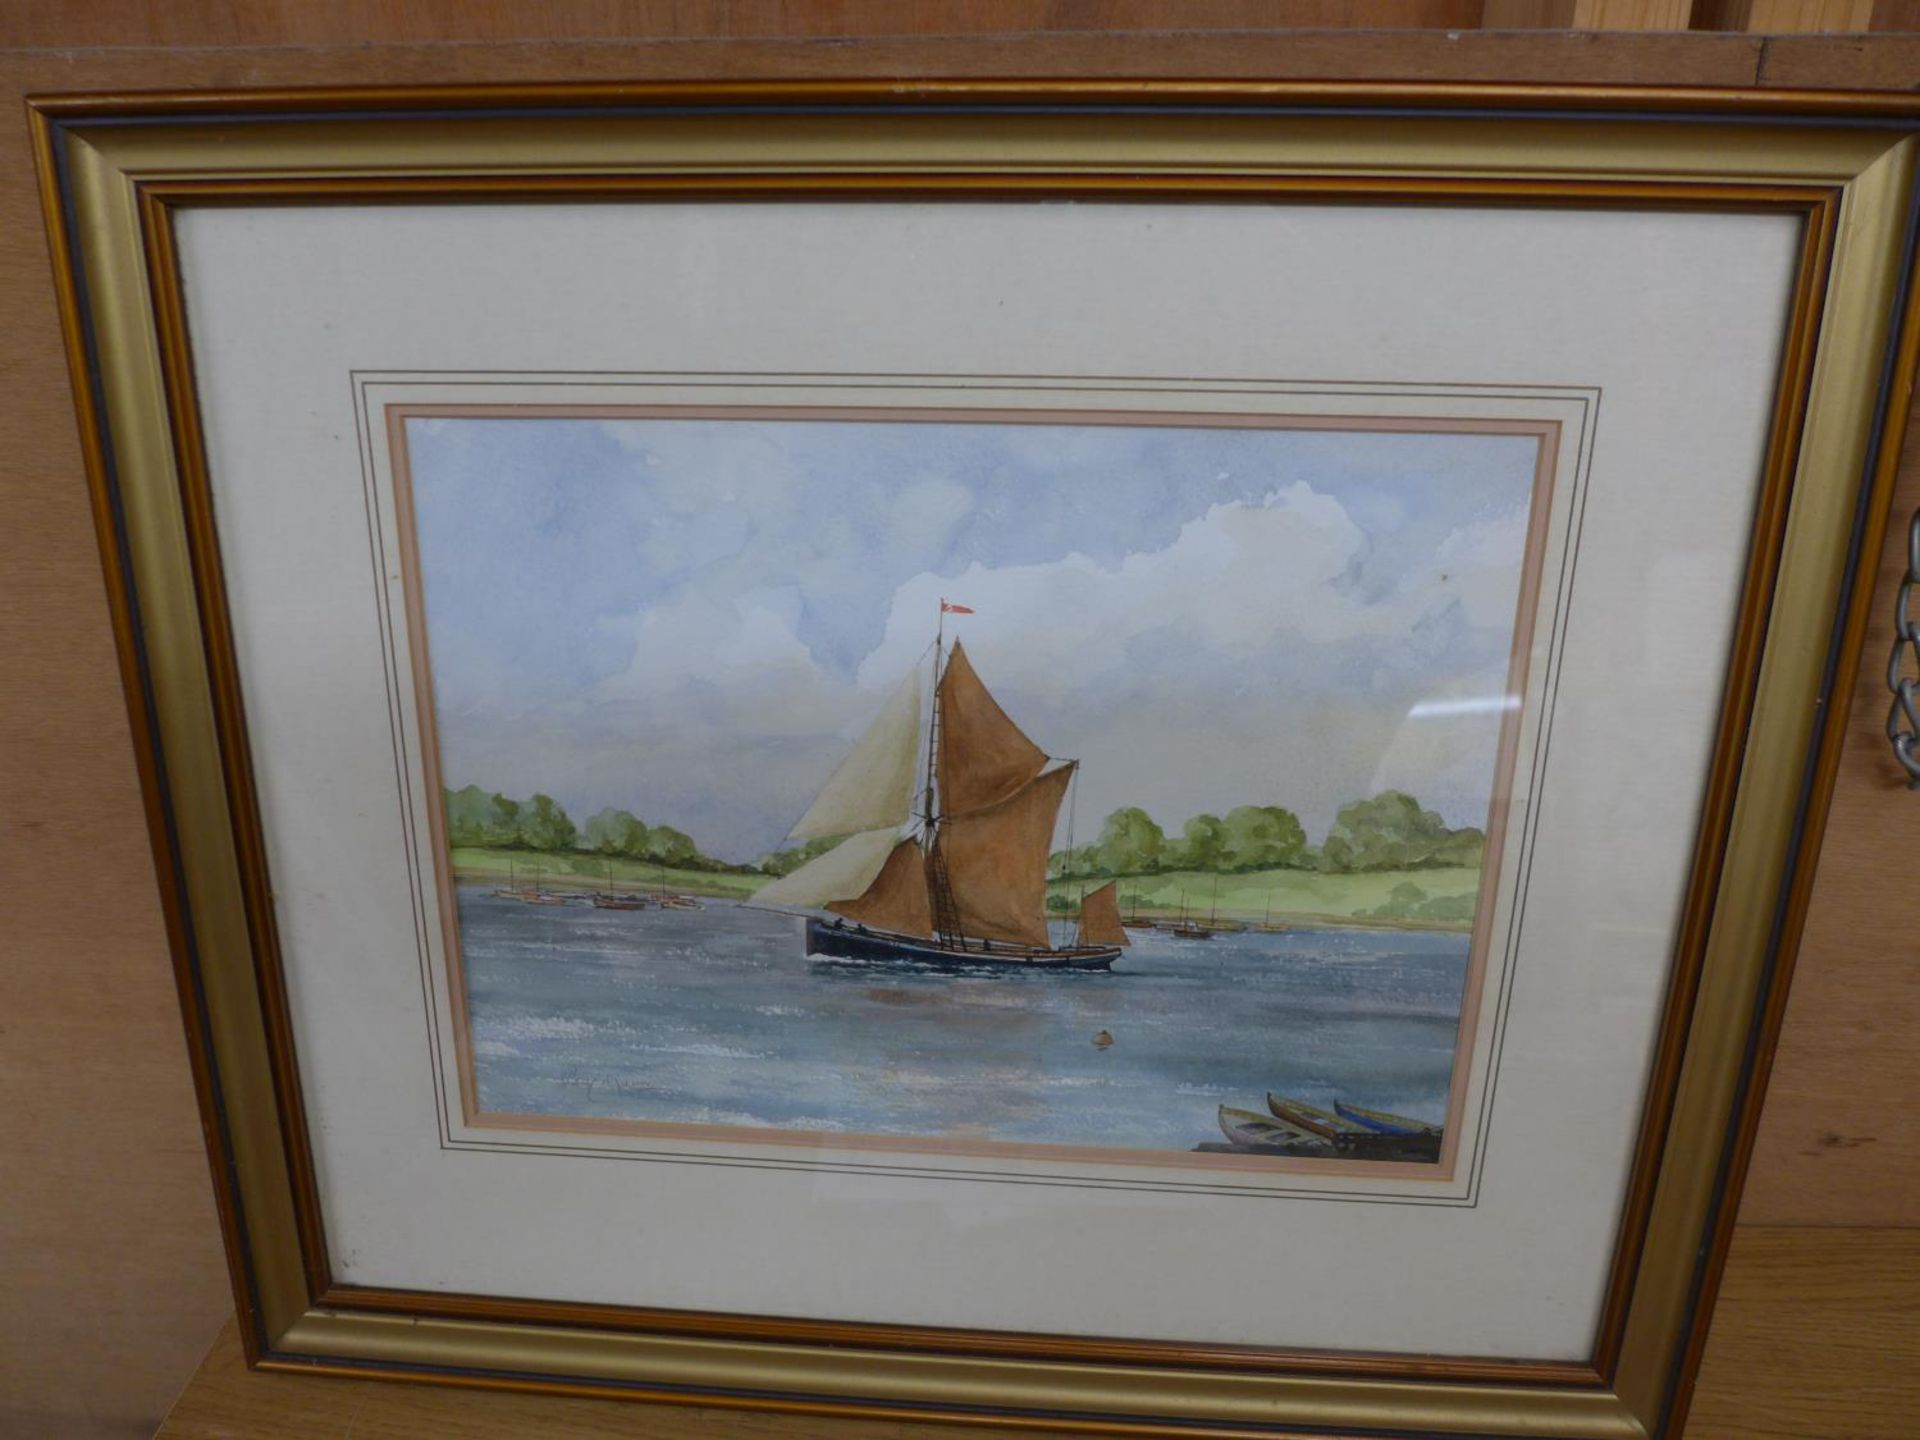 A PAUL MANN (BRITISH 20TH CENTURY) 'IN FULL SAIL' WATERCOLOUR, SIGNED, 26CM X 36CM, SIGNED VERSO,